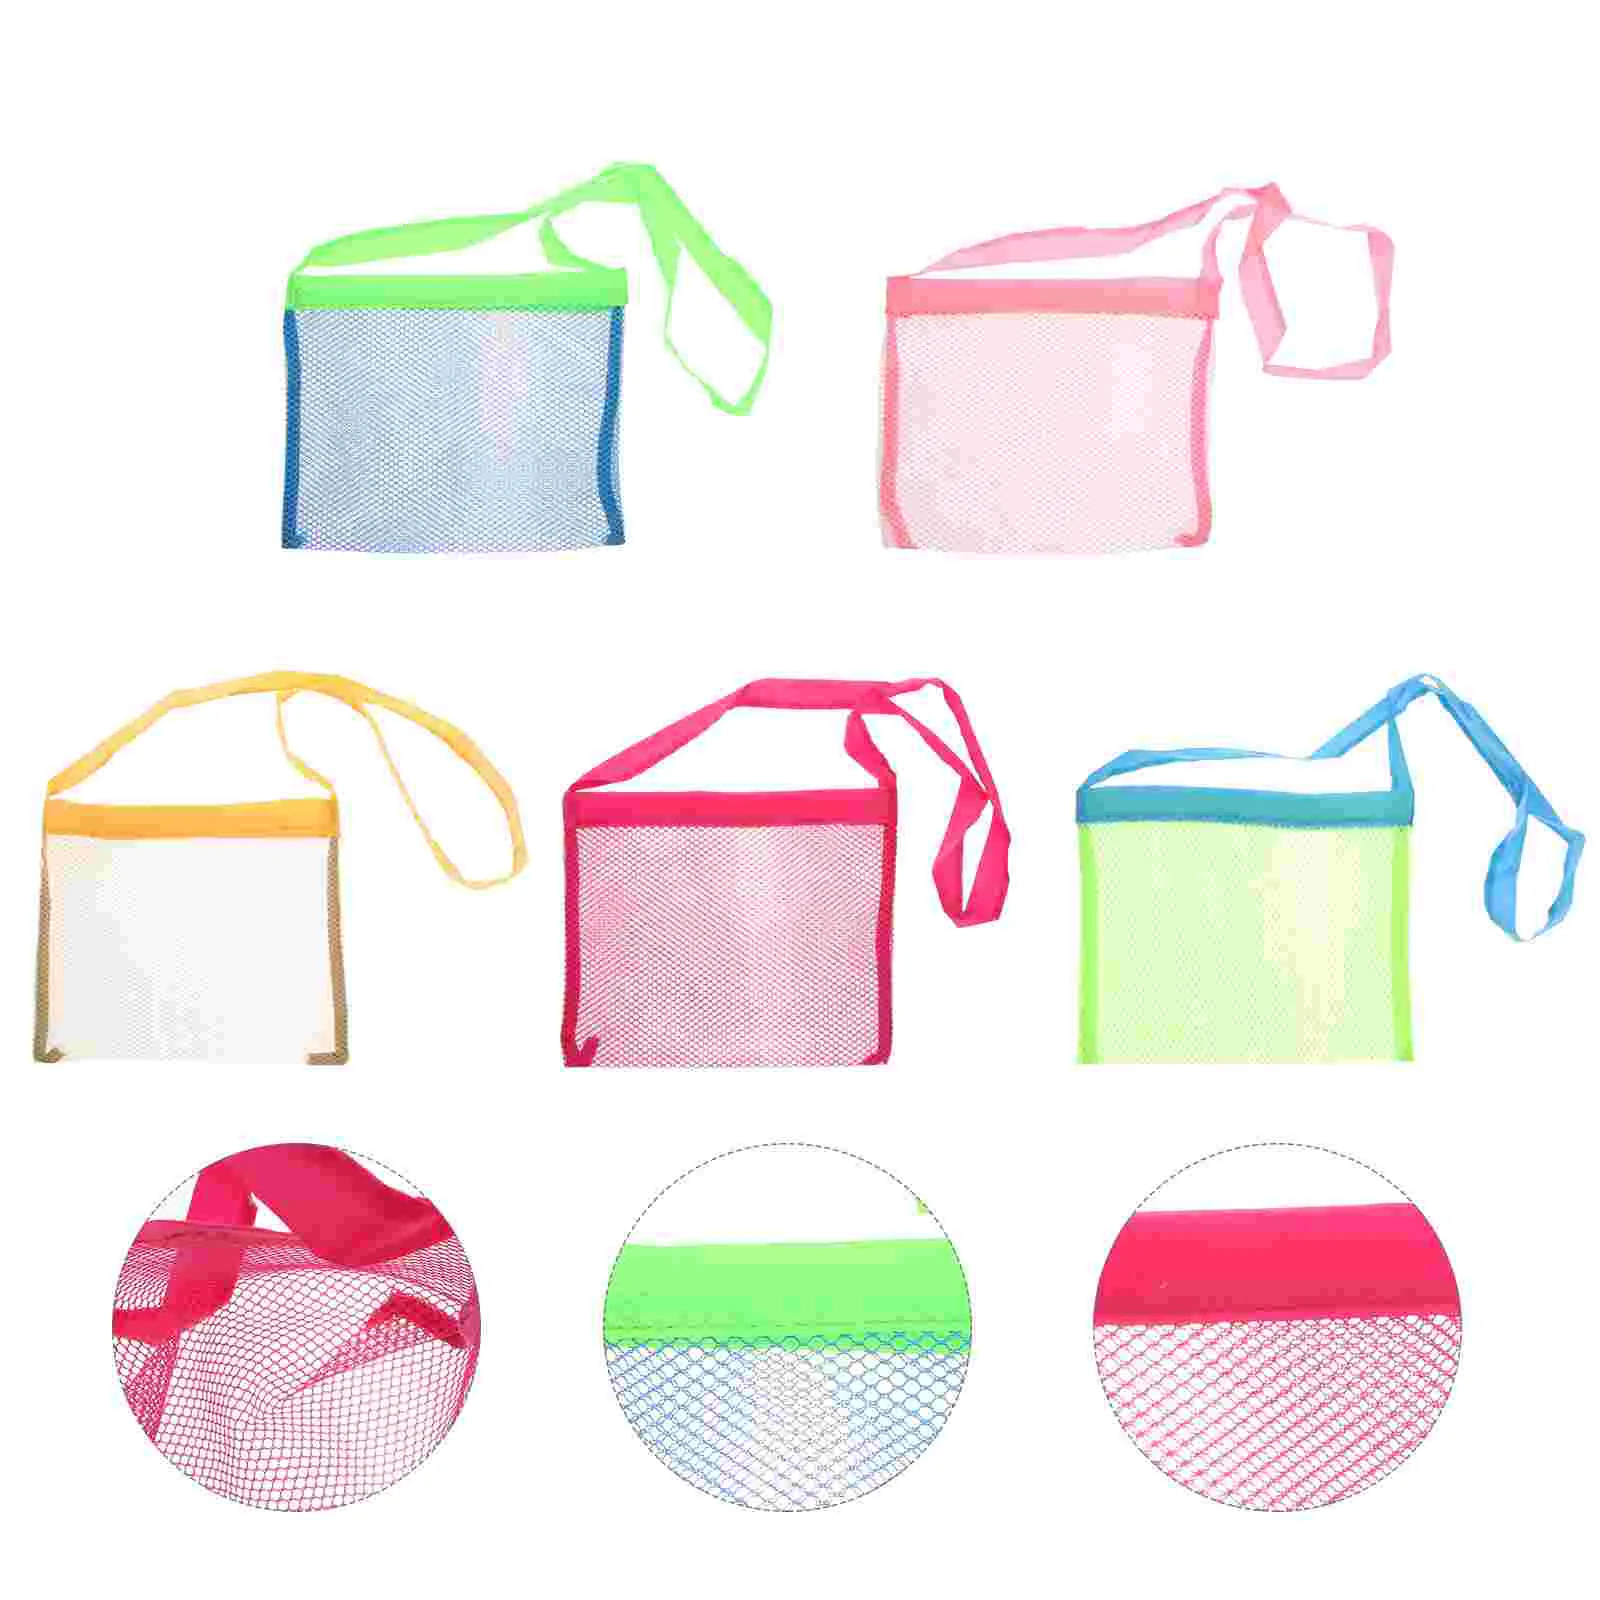 

5pcs Mesh Sea Shell Collecting Bags Beach Sand Toys Bags Shoulder Strap Bags Beach Treasures Seashell Mesh Bags Toy Storage